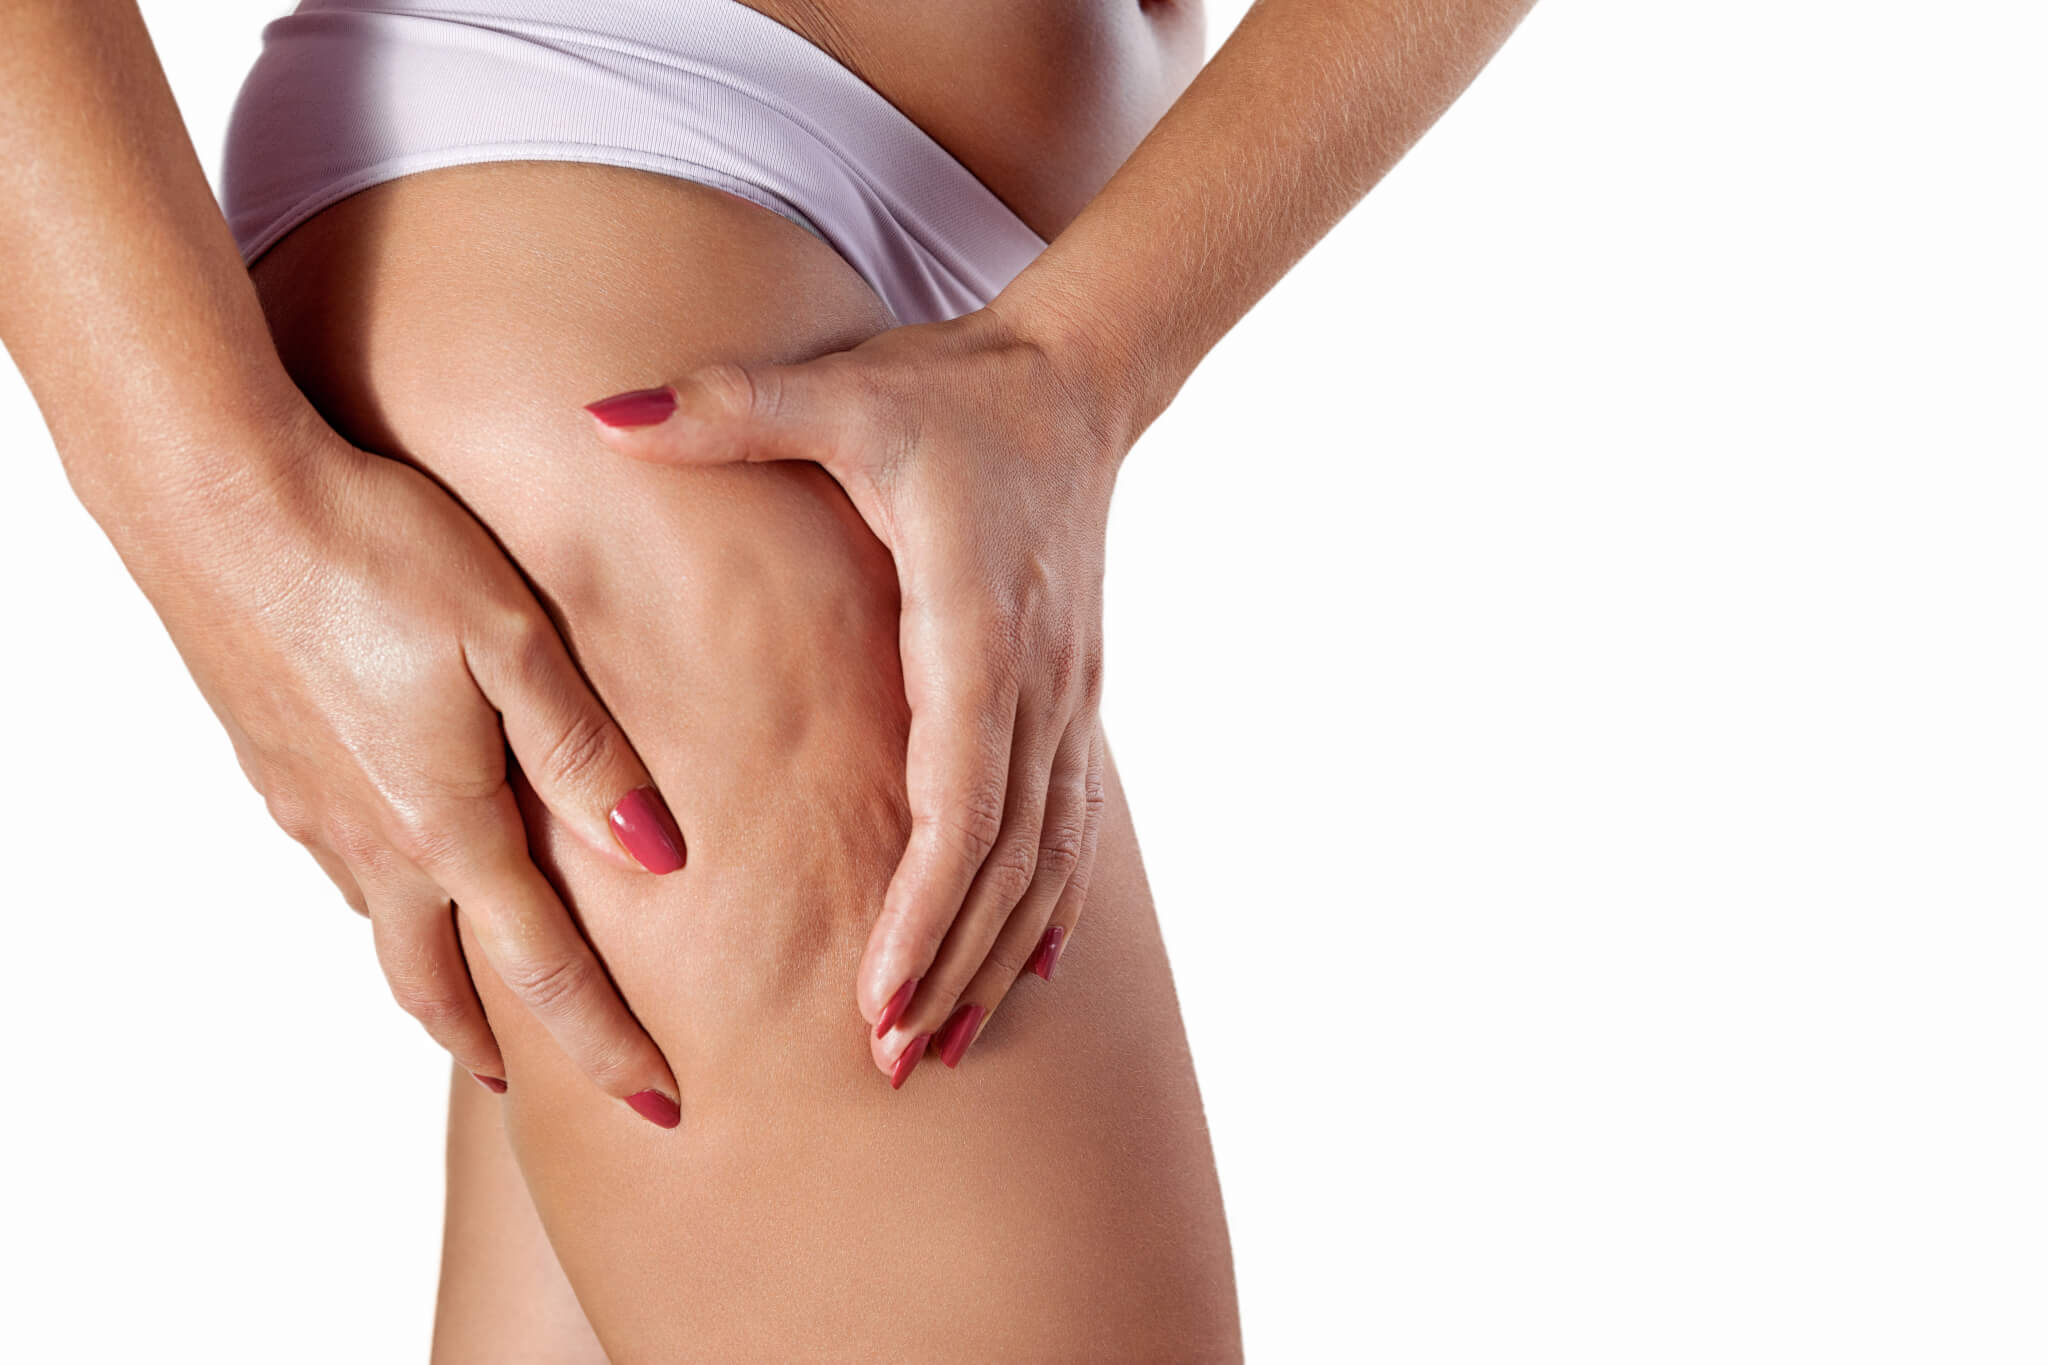 Should I Use Liposuction to Treat Cellulite